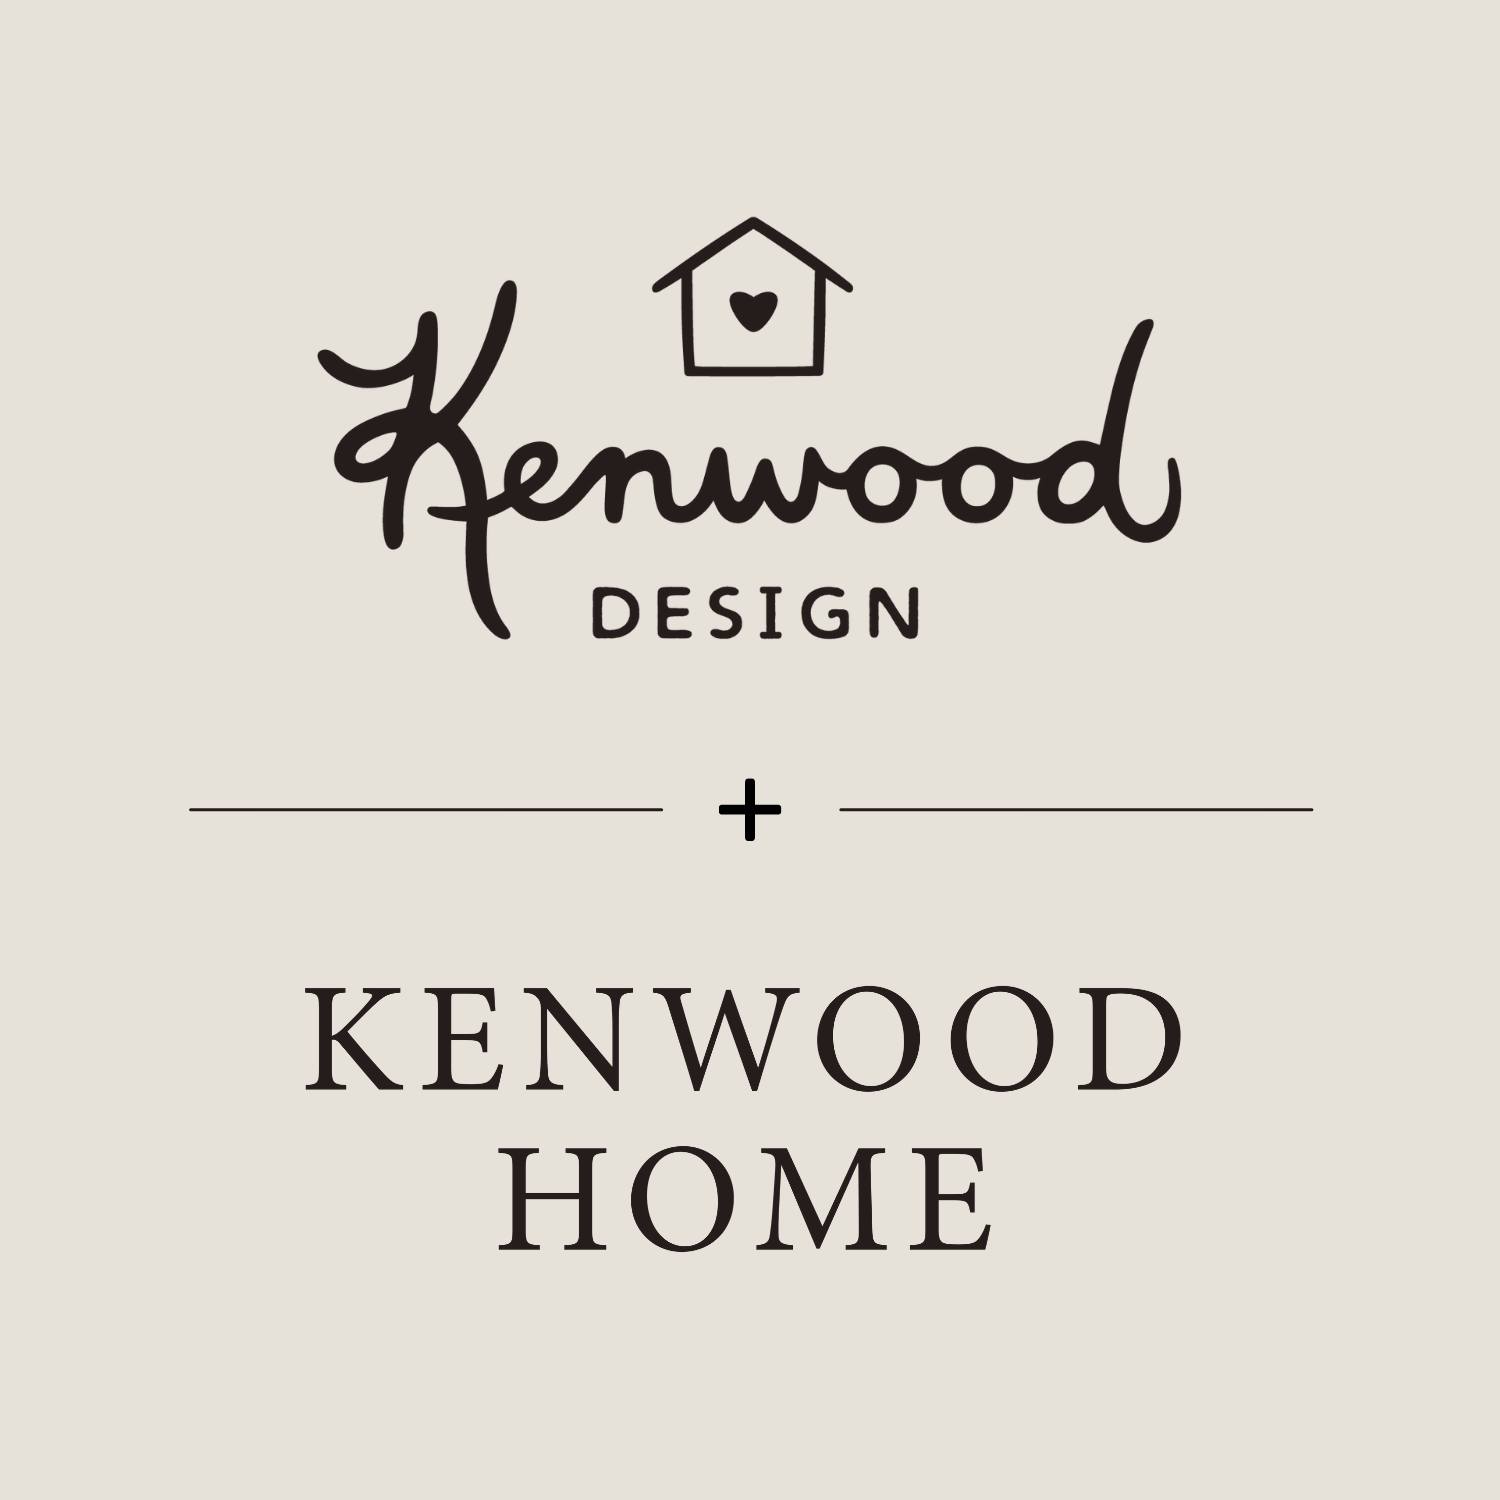 Kenwood Home and Design's Image